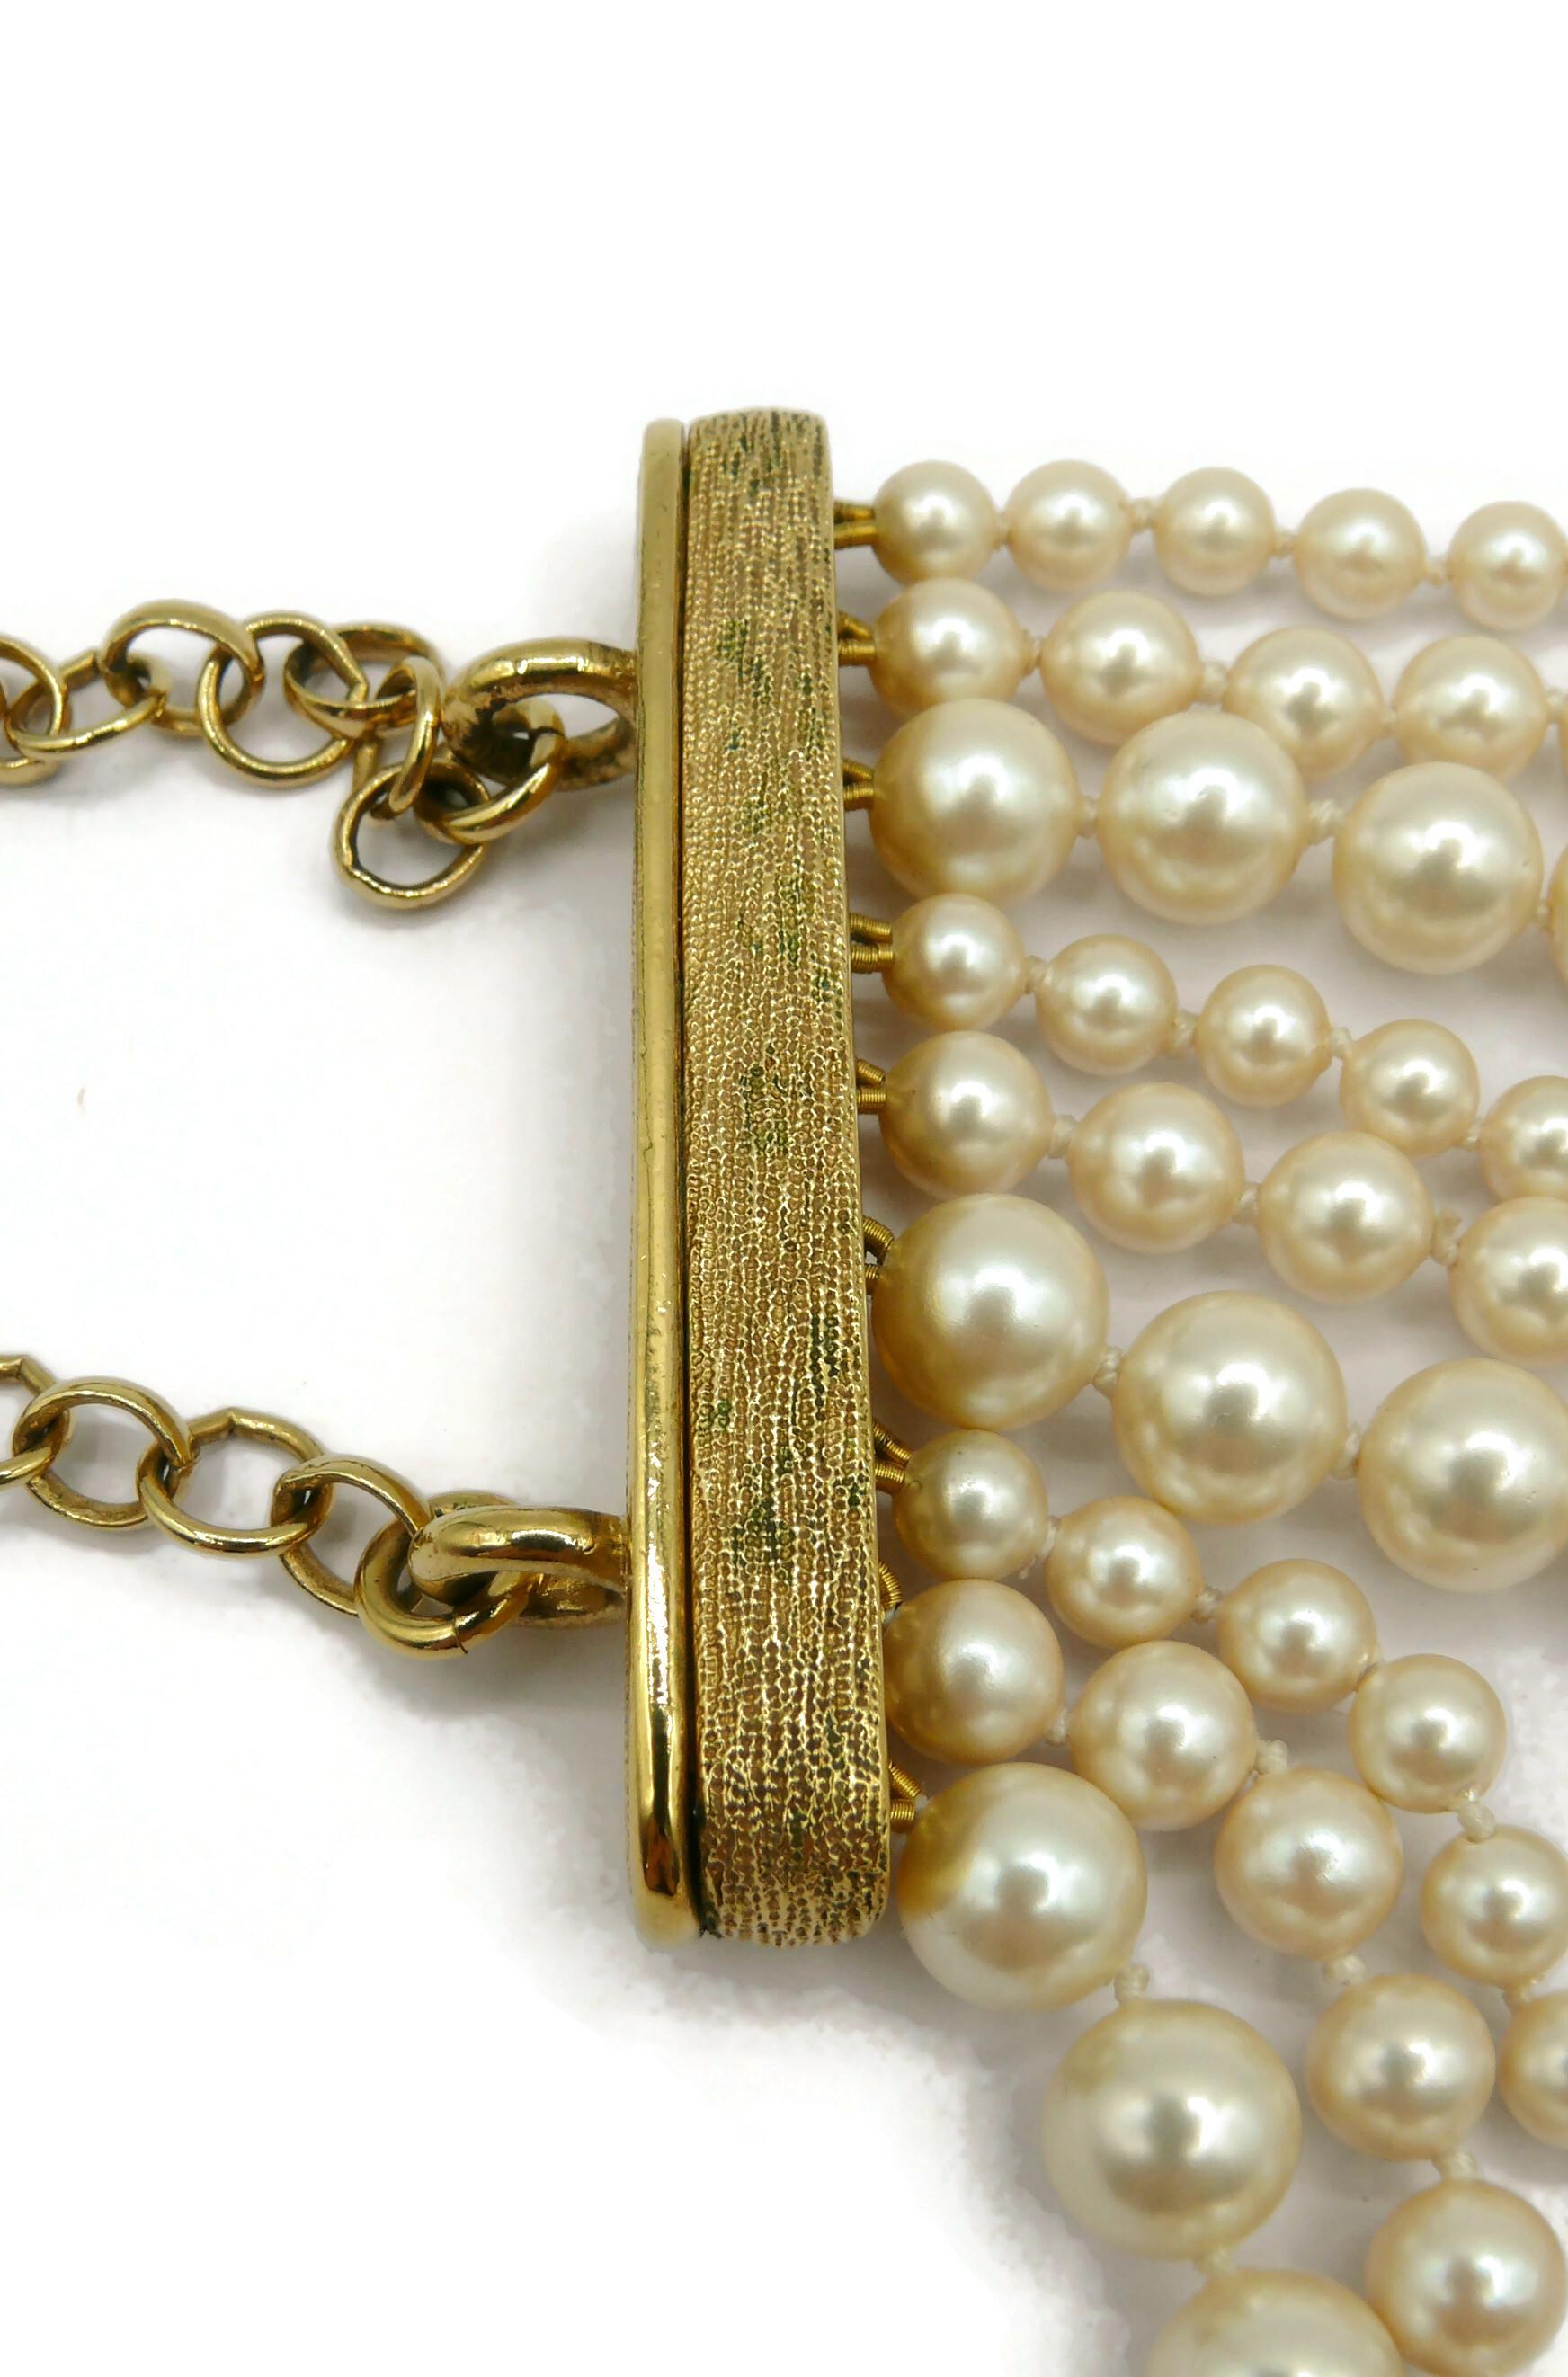 CHRISTIAN DIOR Vintage Multi-Strand Faux Pearl Necklace For Sale 10